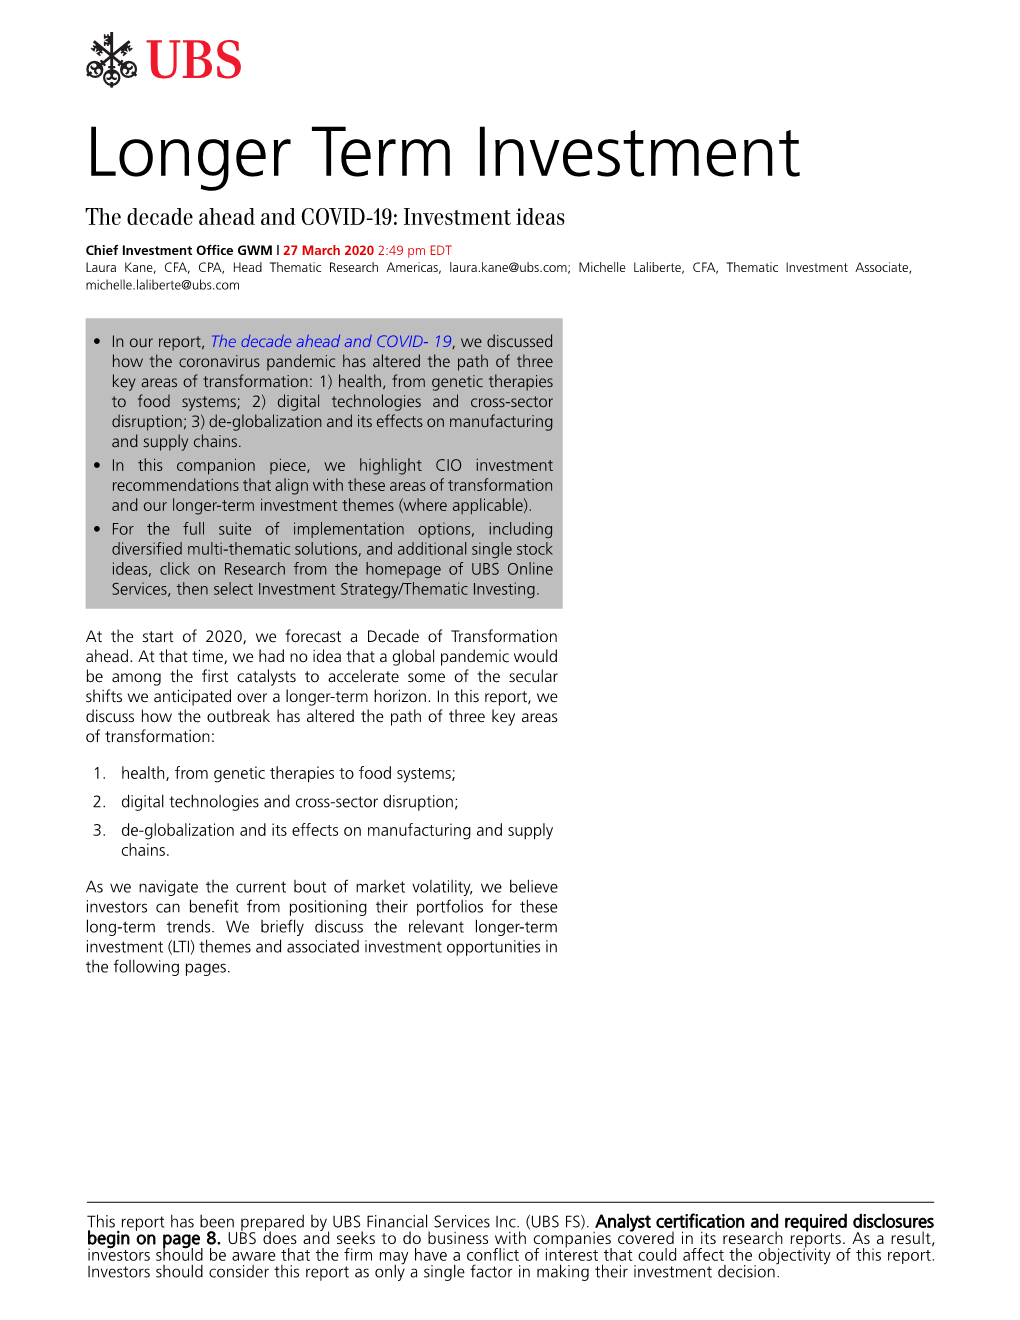 Longer Term Investment the Decade Ahead and COVID-19: Investment Ideas